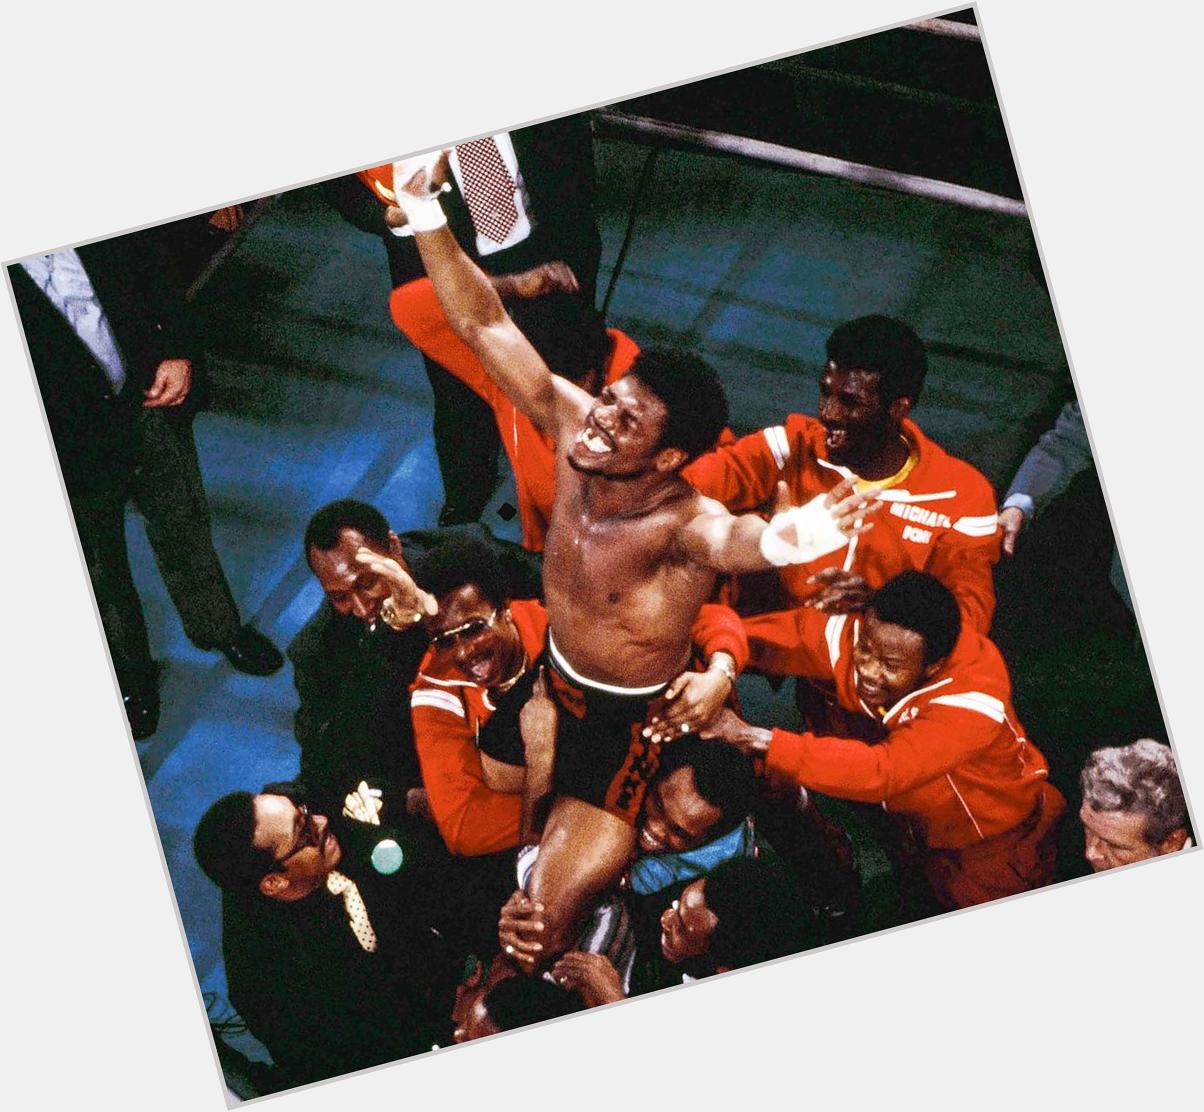 Happy Birthday Leon Spinks who was born on July 11, 1953

Sports history July:  